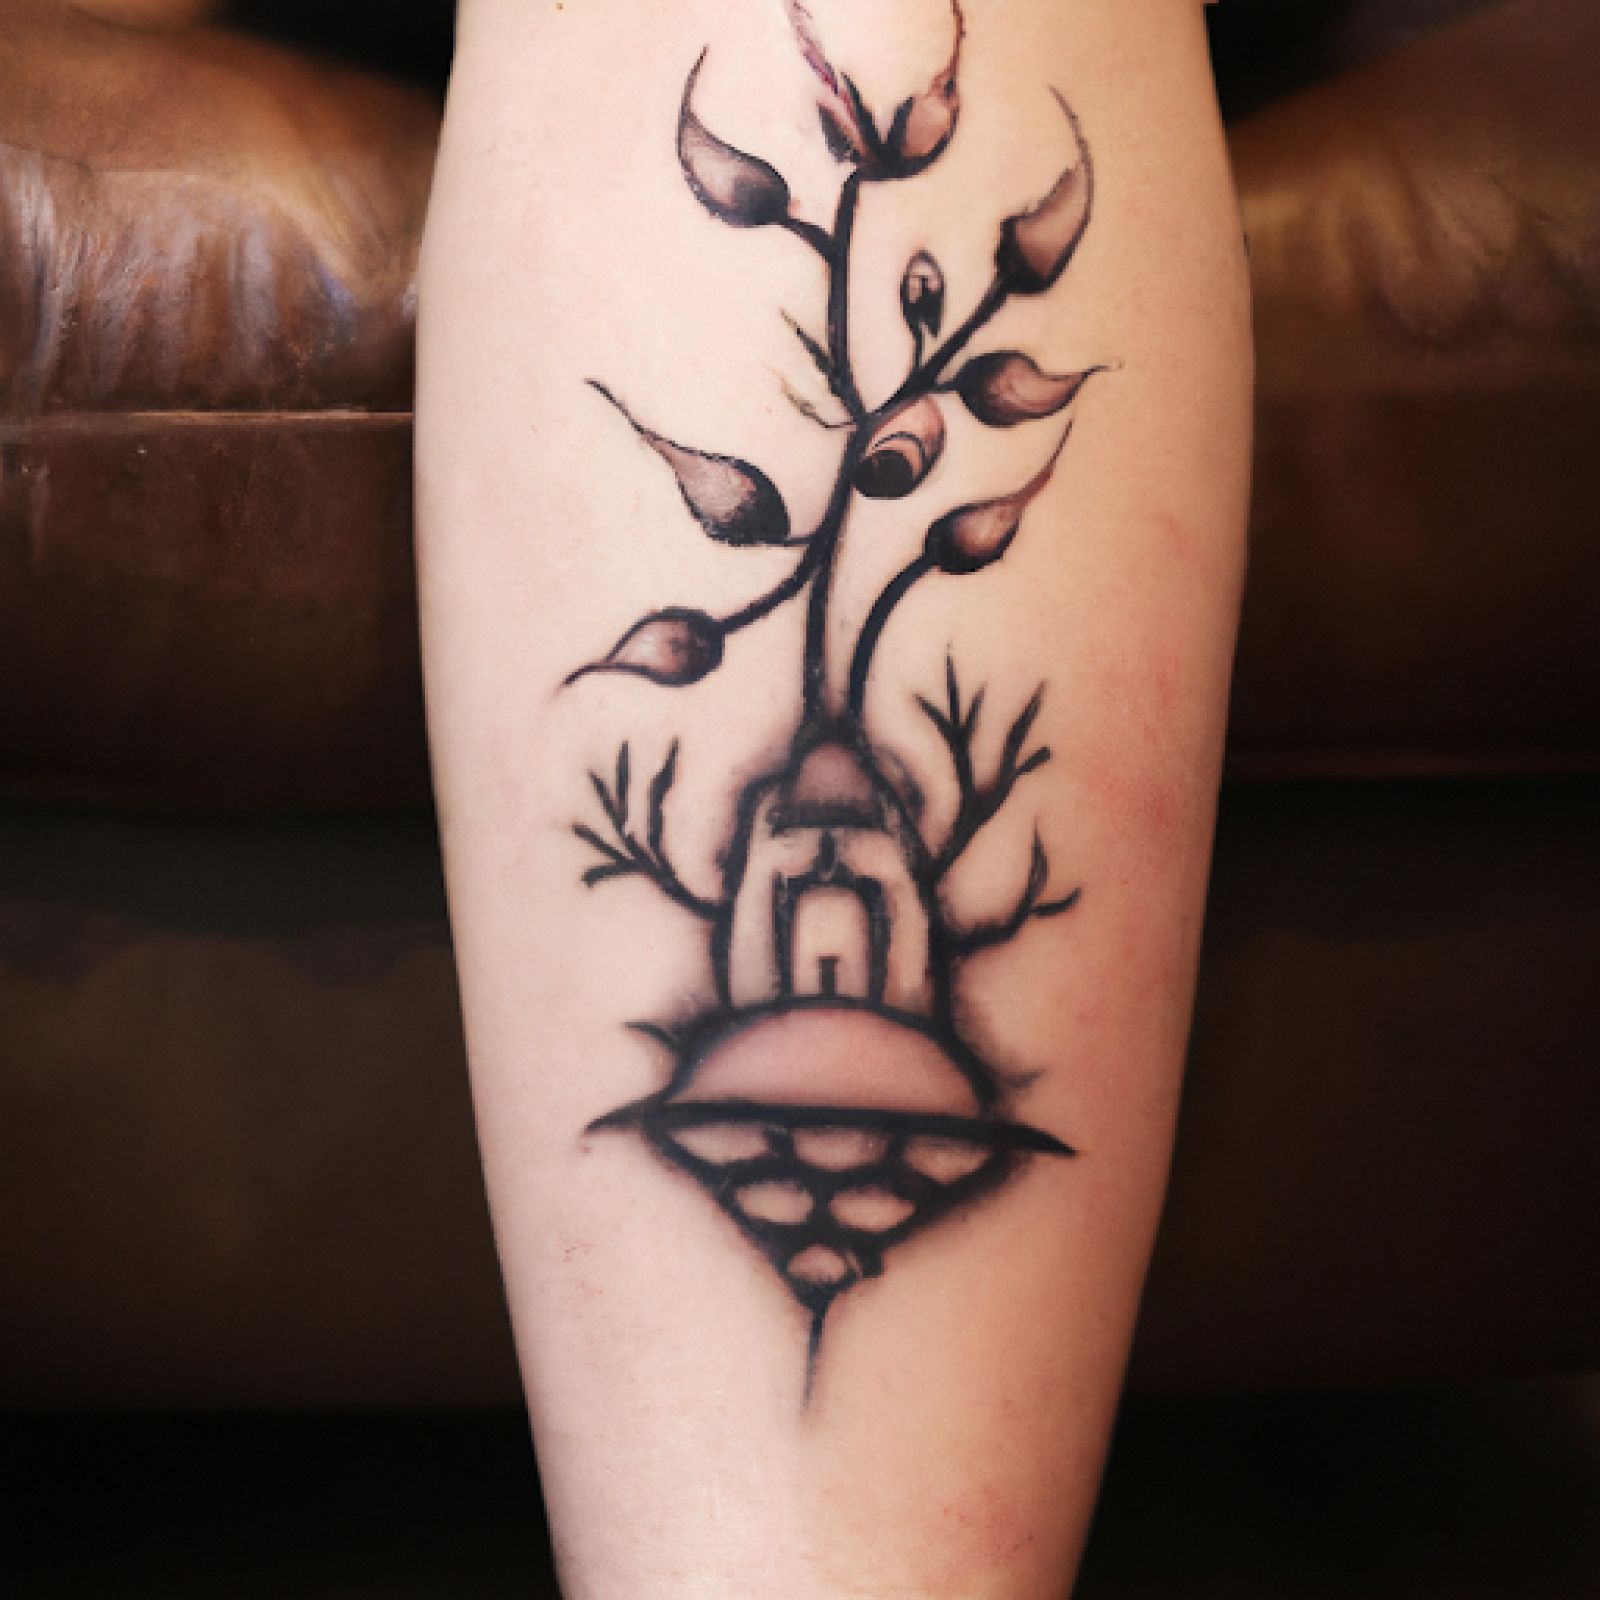 Tree of life tattoo on knee for women